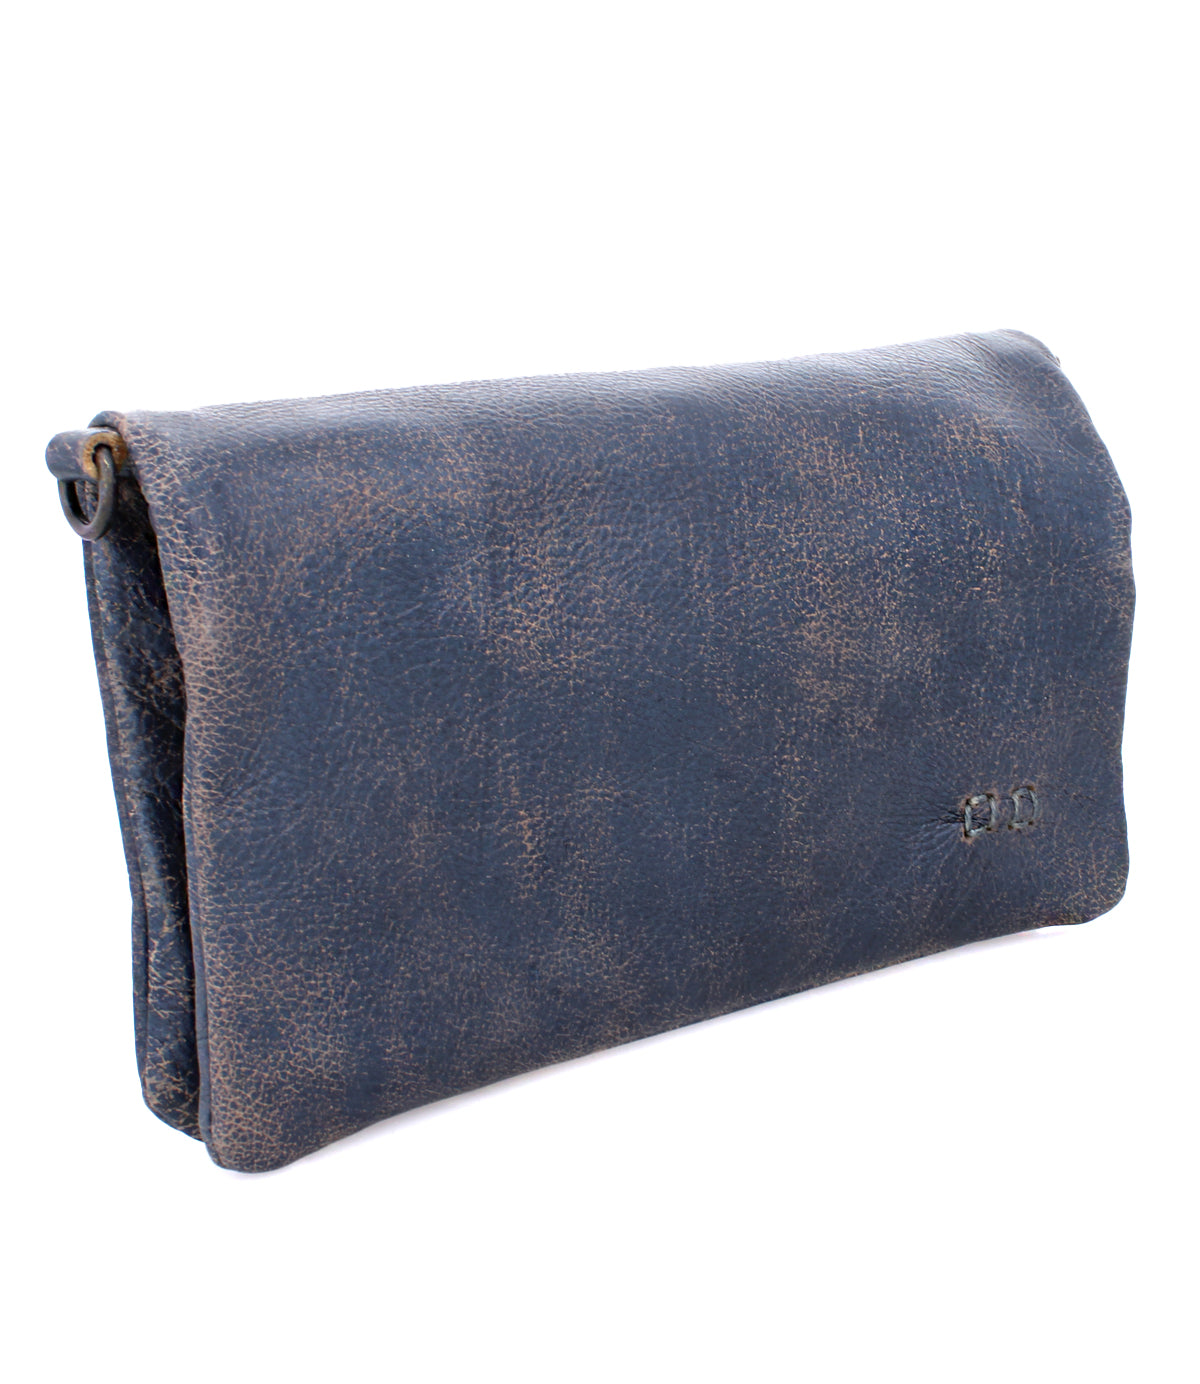 A Cadence blue leather clutch bag by Bed Stu.